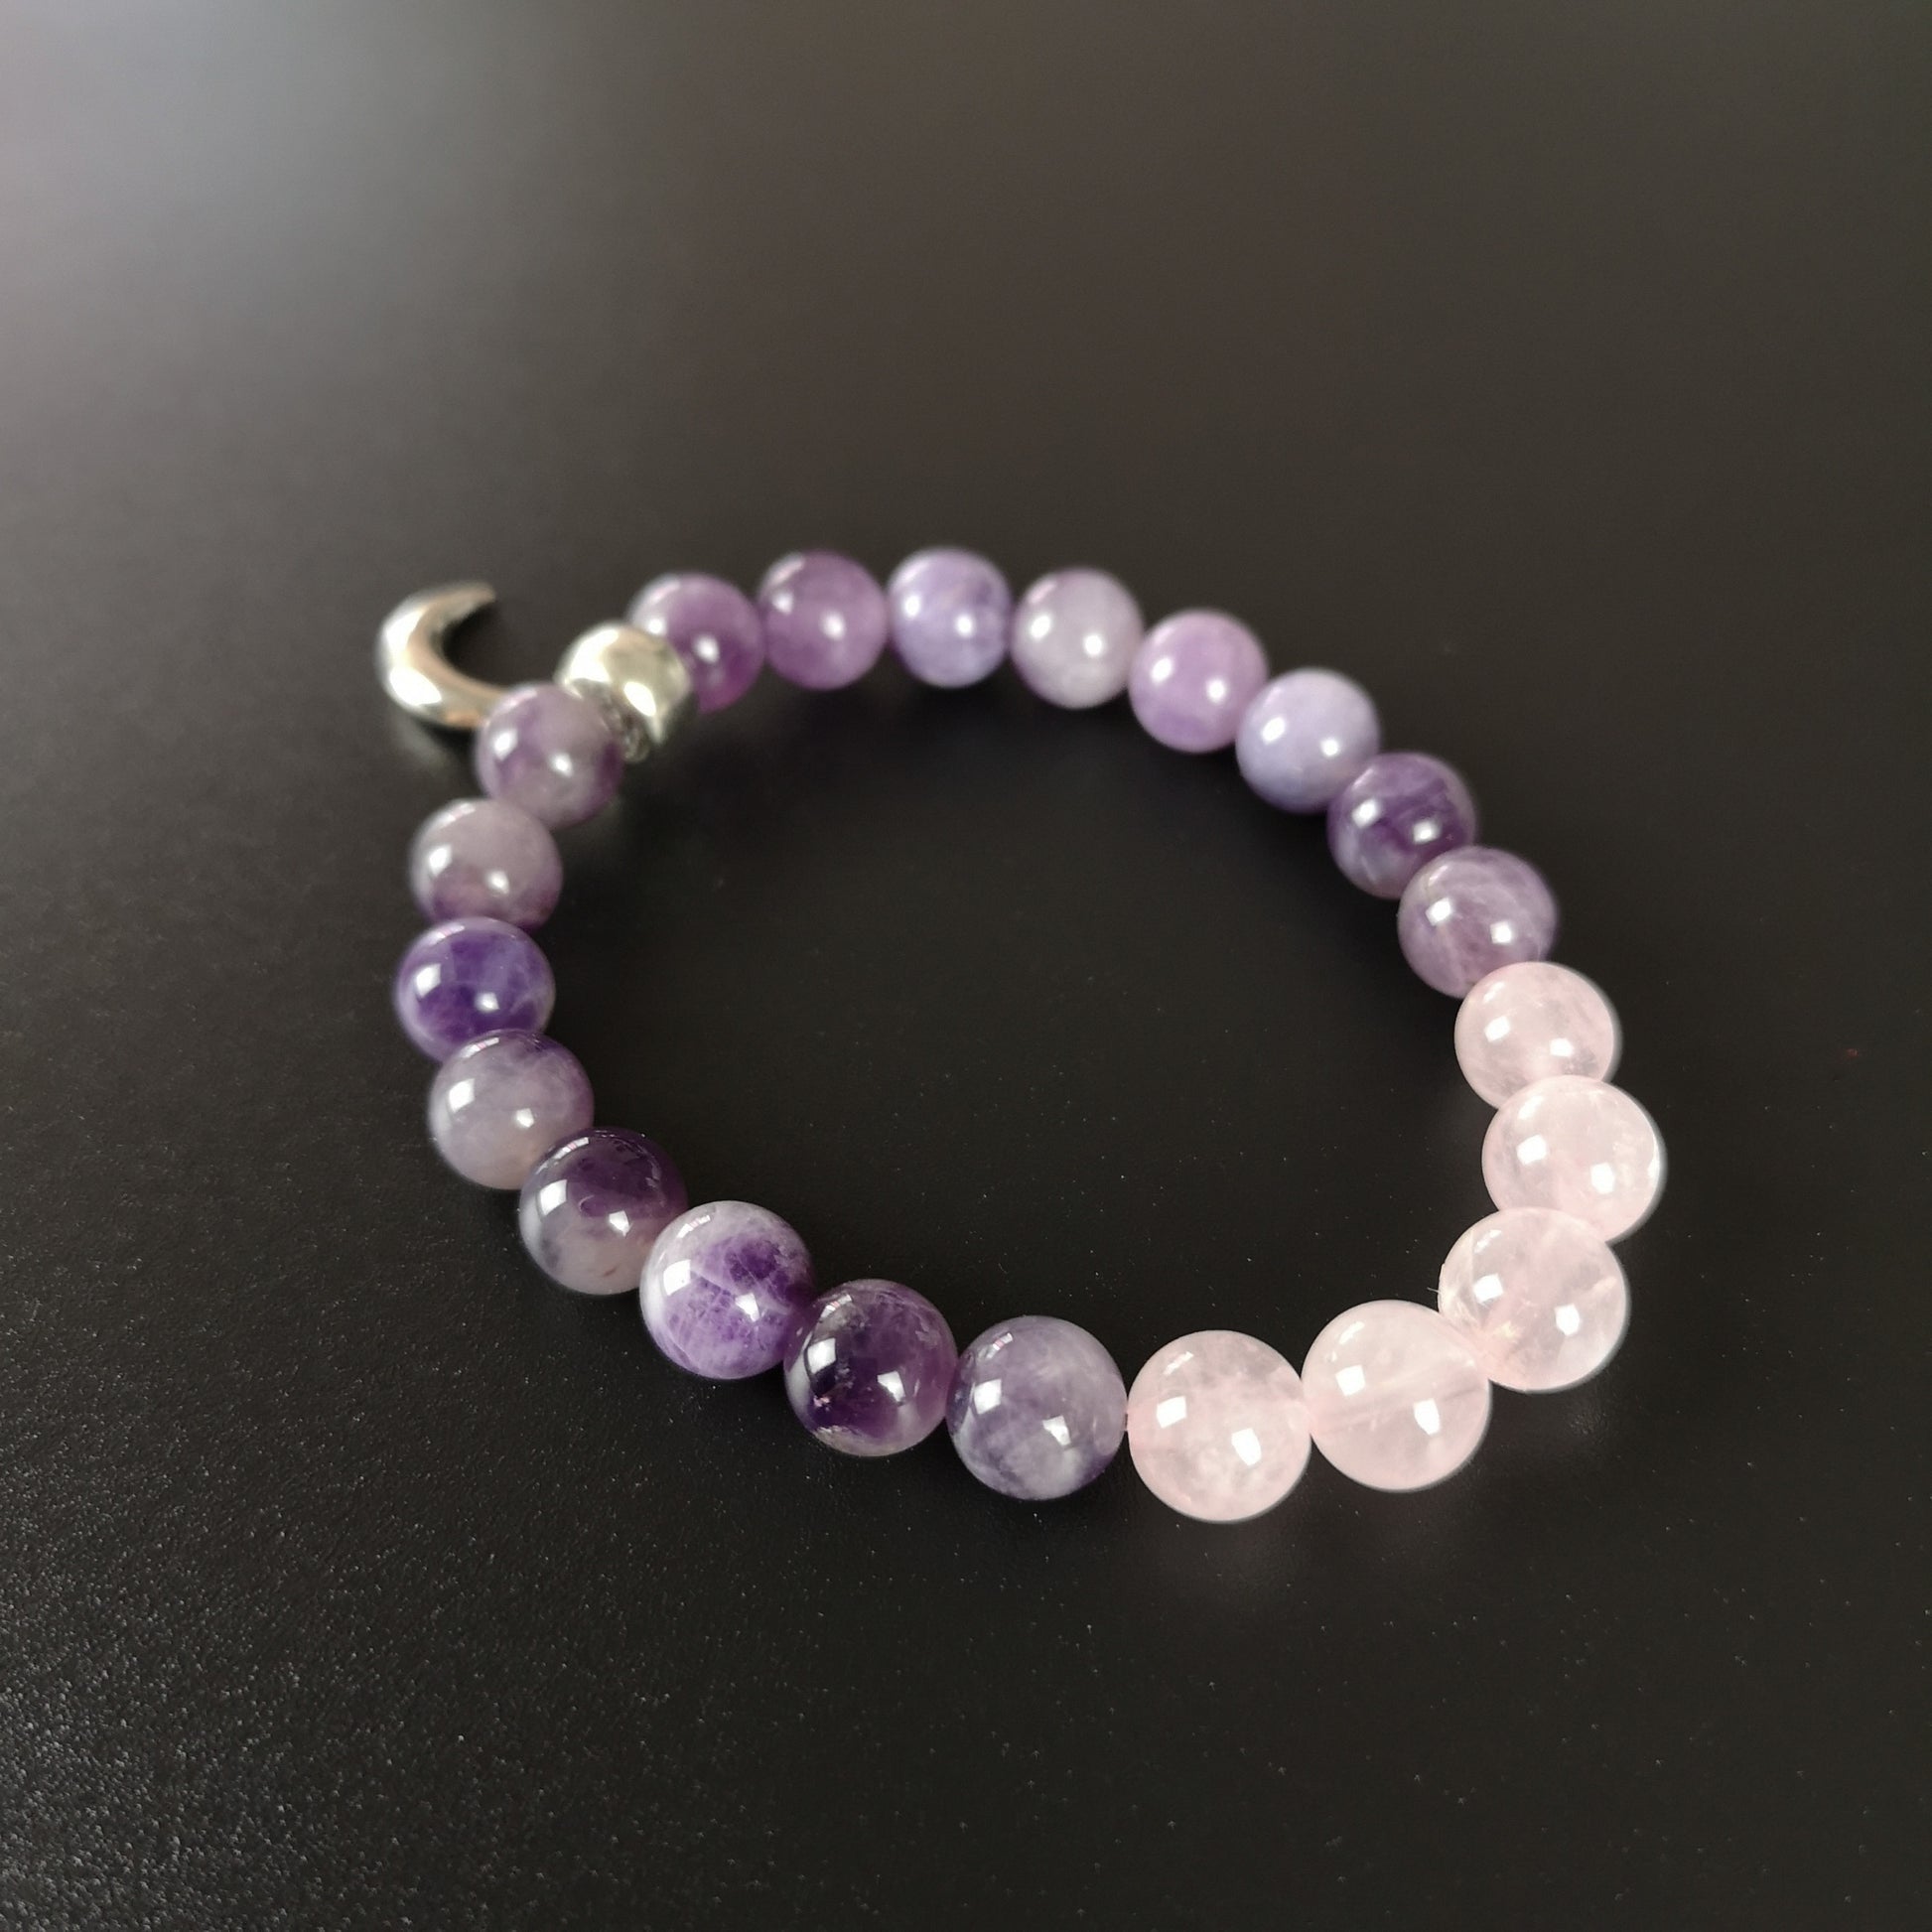 Amethyst and rose quartz mala beaded bracelet with a crescent moon charm - 18 cm - The French Witch shop